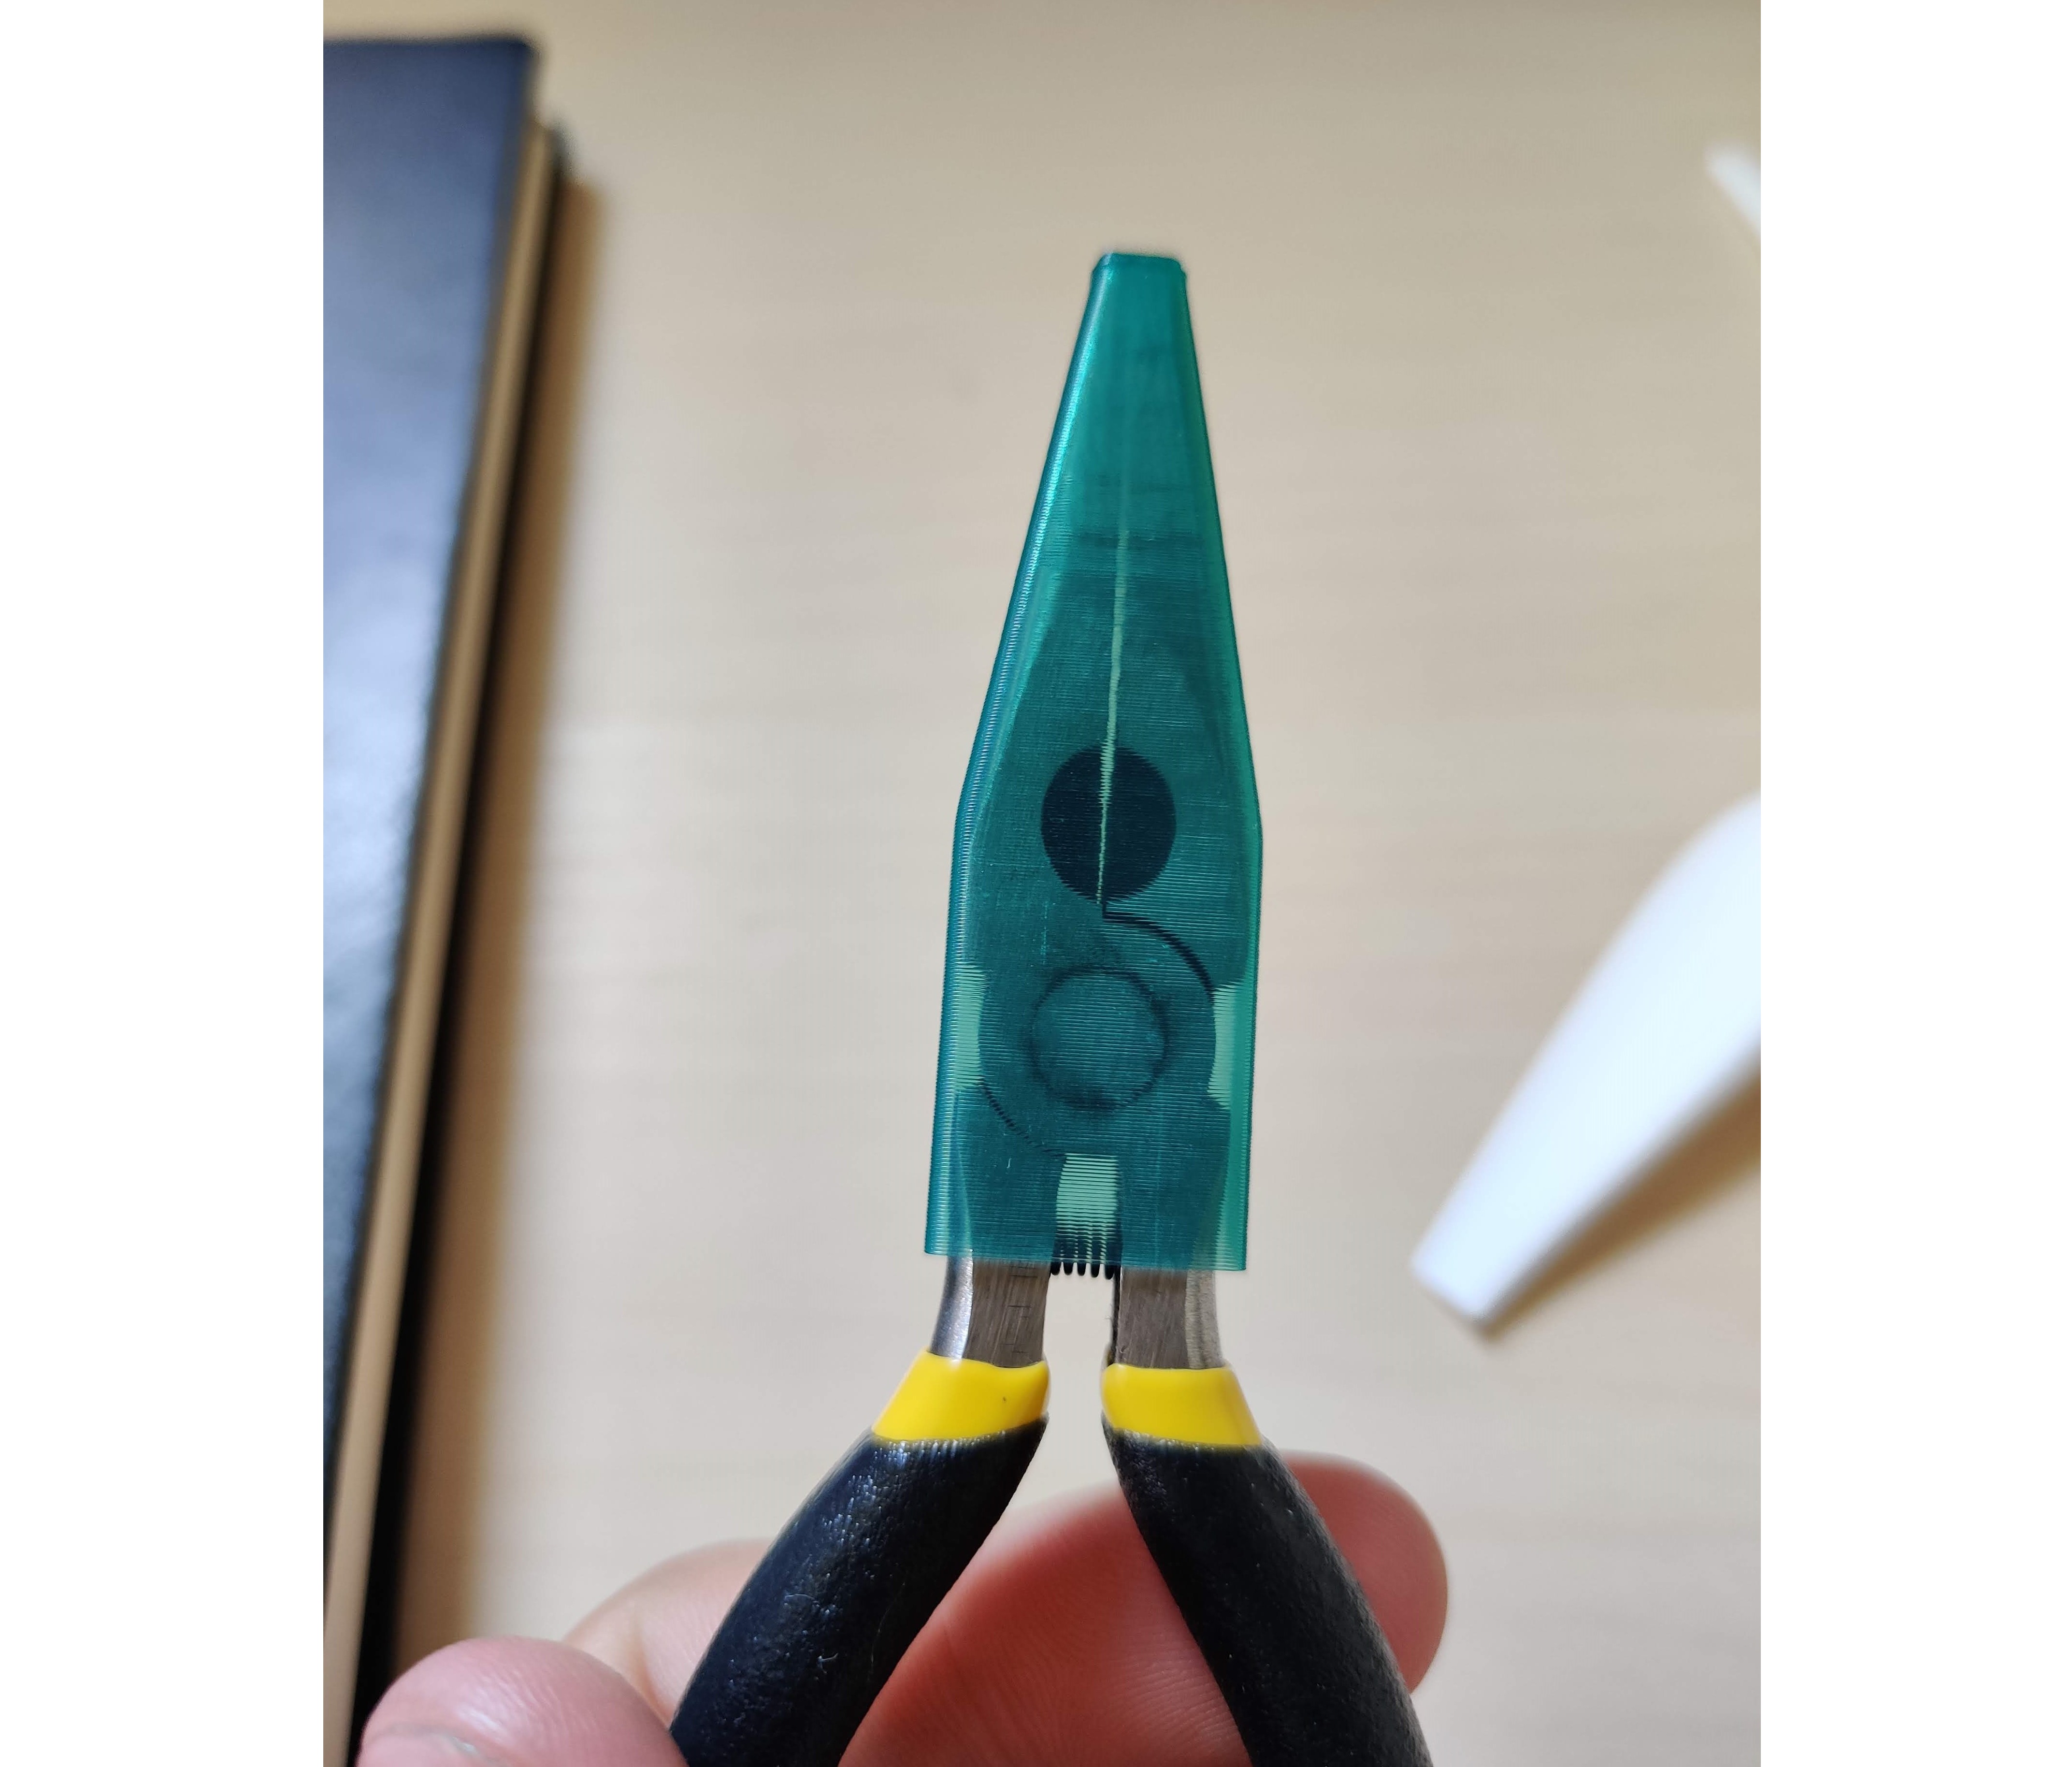 Pliers Cover Cap for spring pliers included in MK3/S Kit